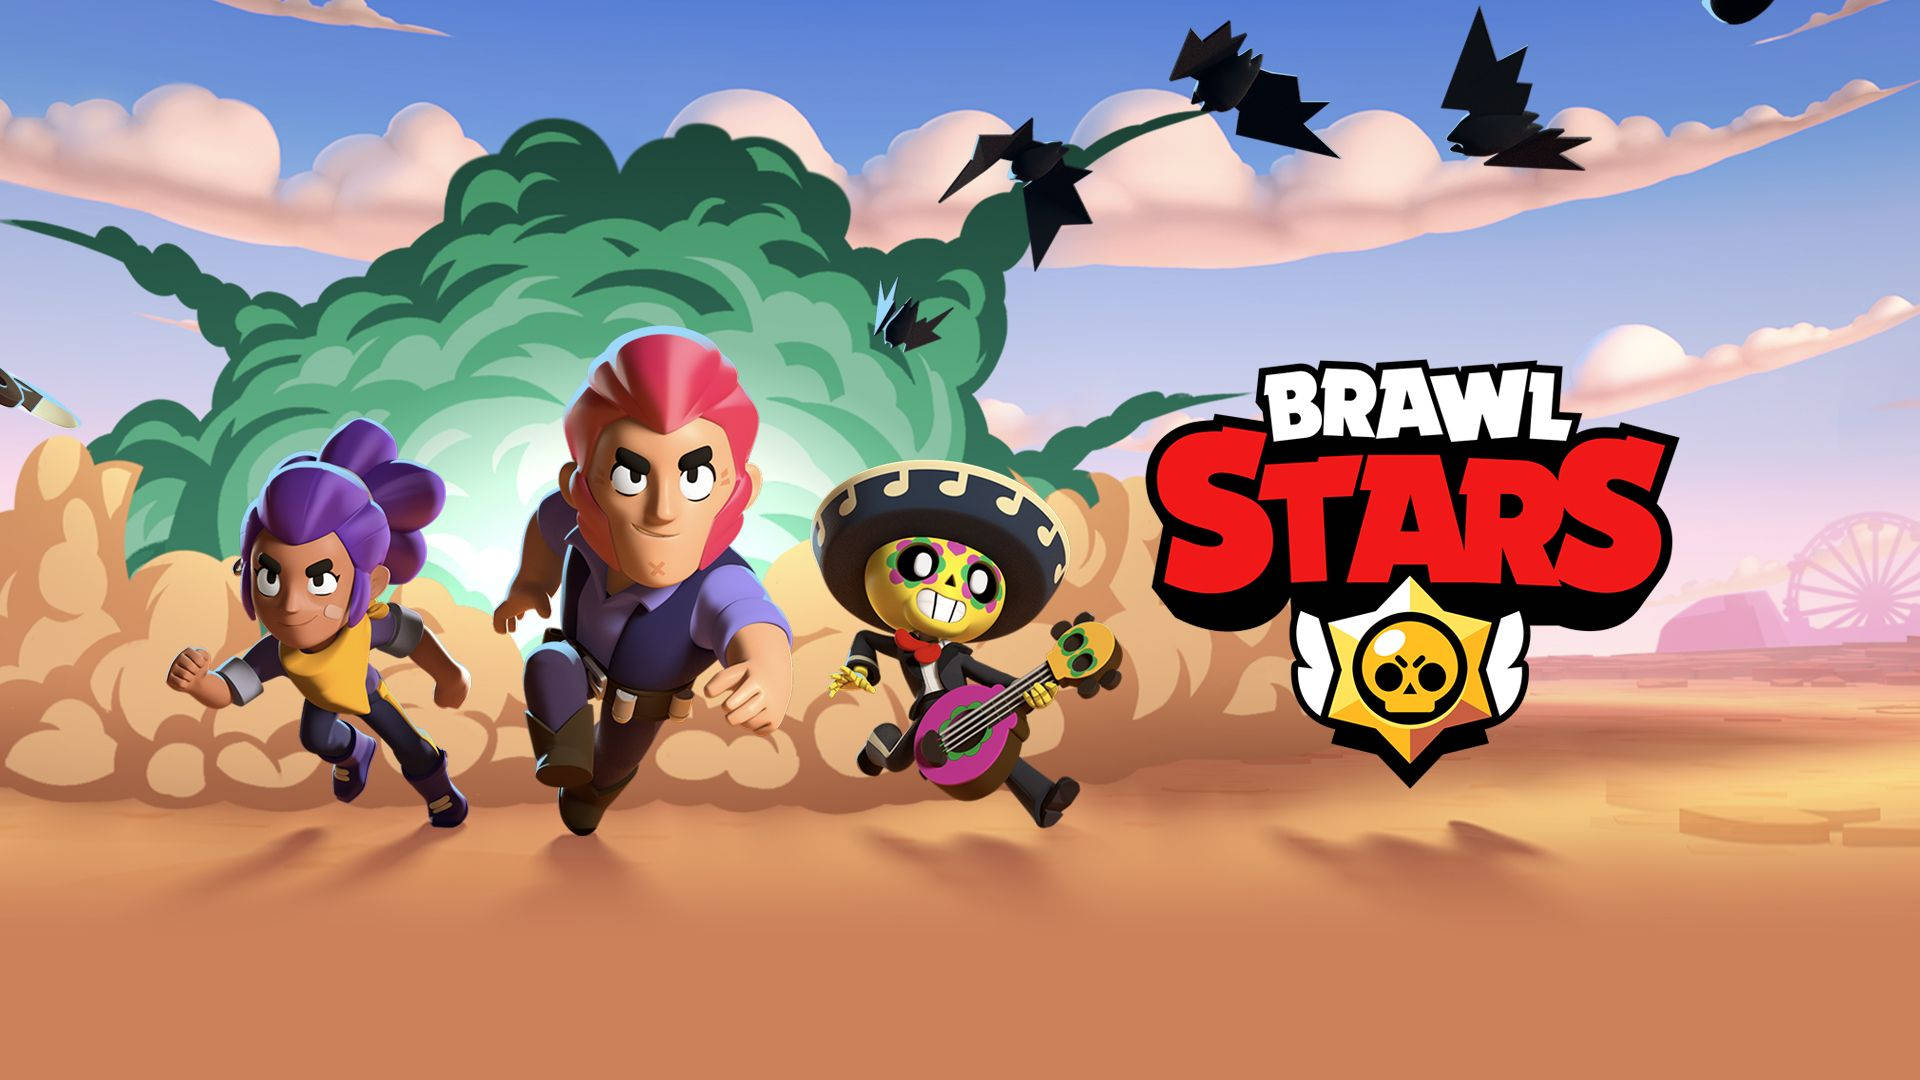 It's time for adventure! Join the team in Brawl Stars’ running trio. Wallpaper